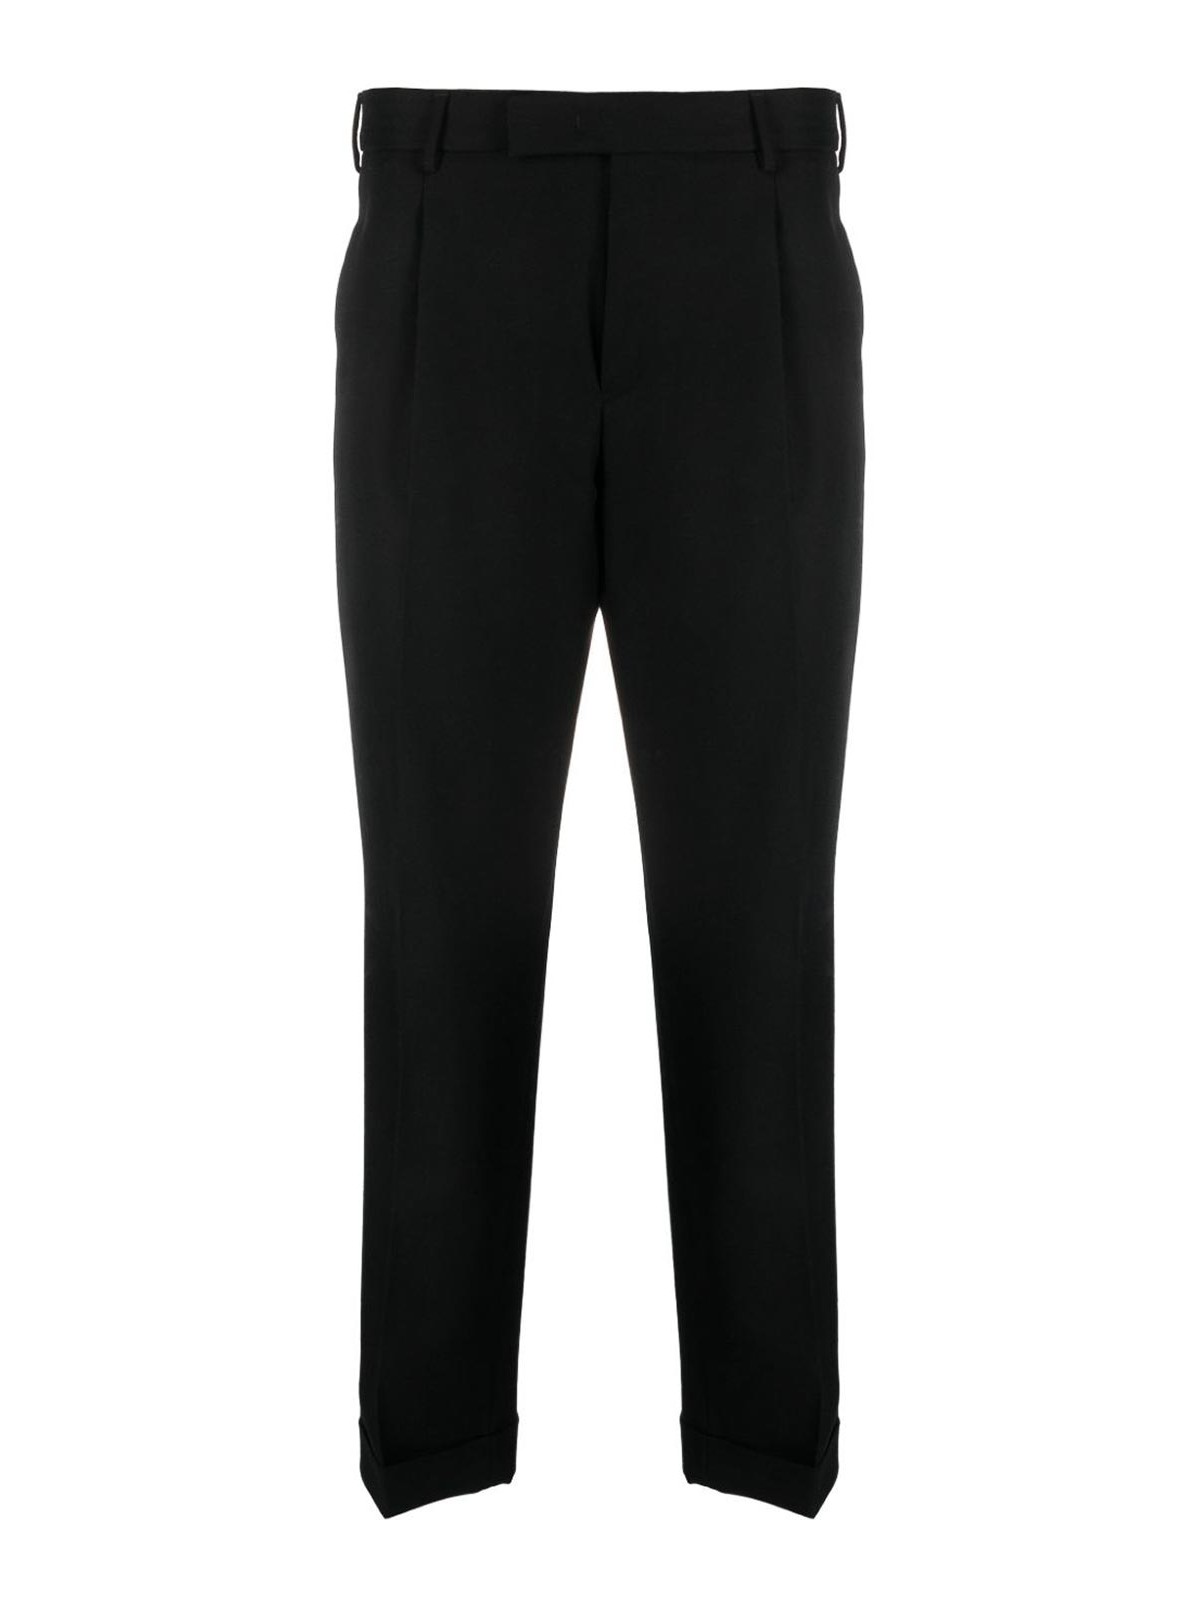 Pt Torino Tailored Trousers In Black